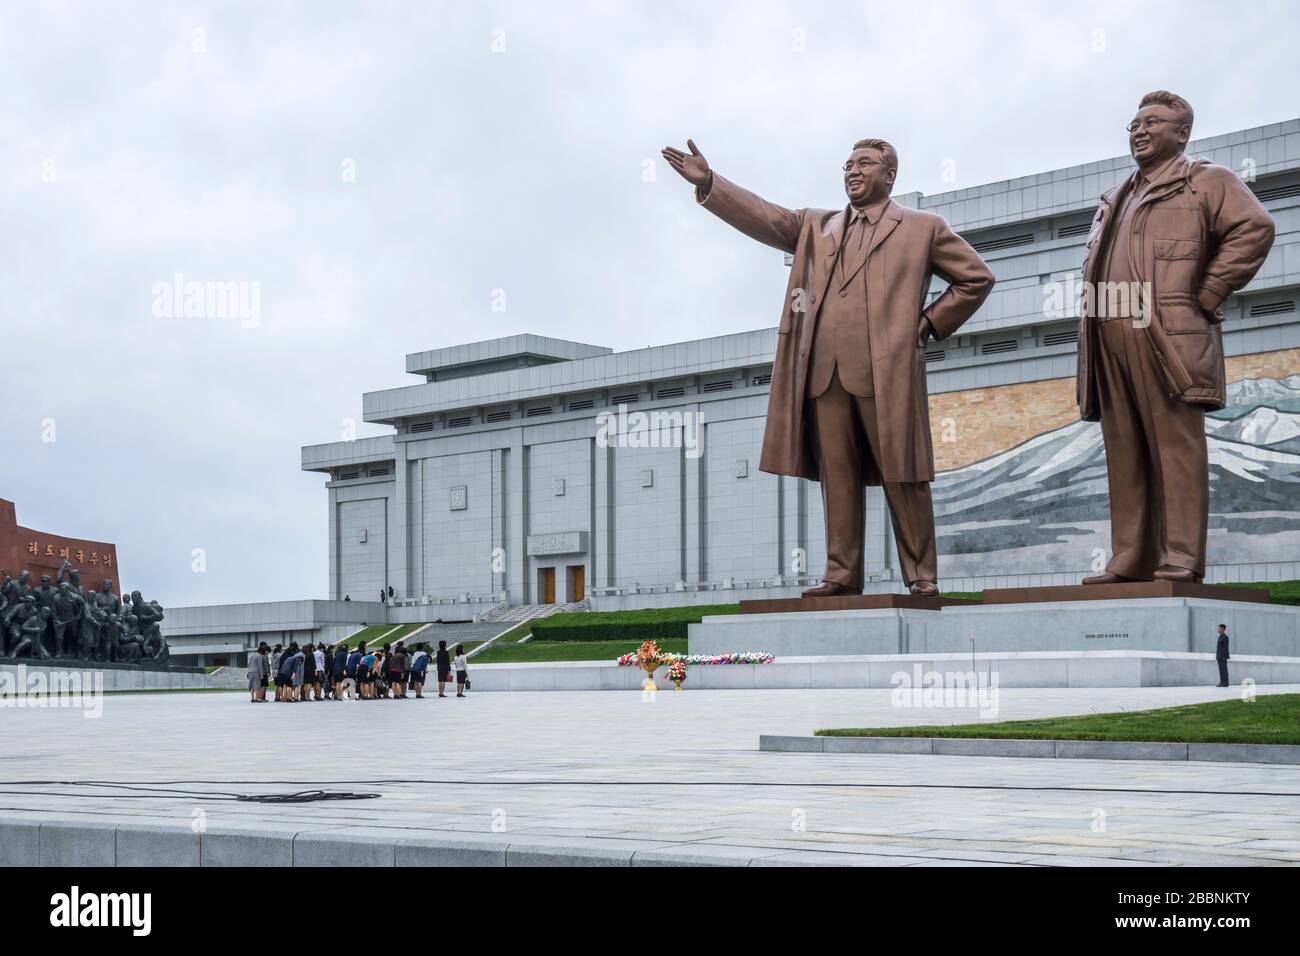 North Korean people bowing in front of Kim Il Sung and Kim Jong Il statues in Mansudae Grand Monument, Pyongyang, North Korea Stock Photo